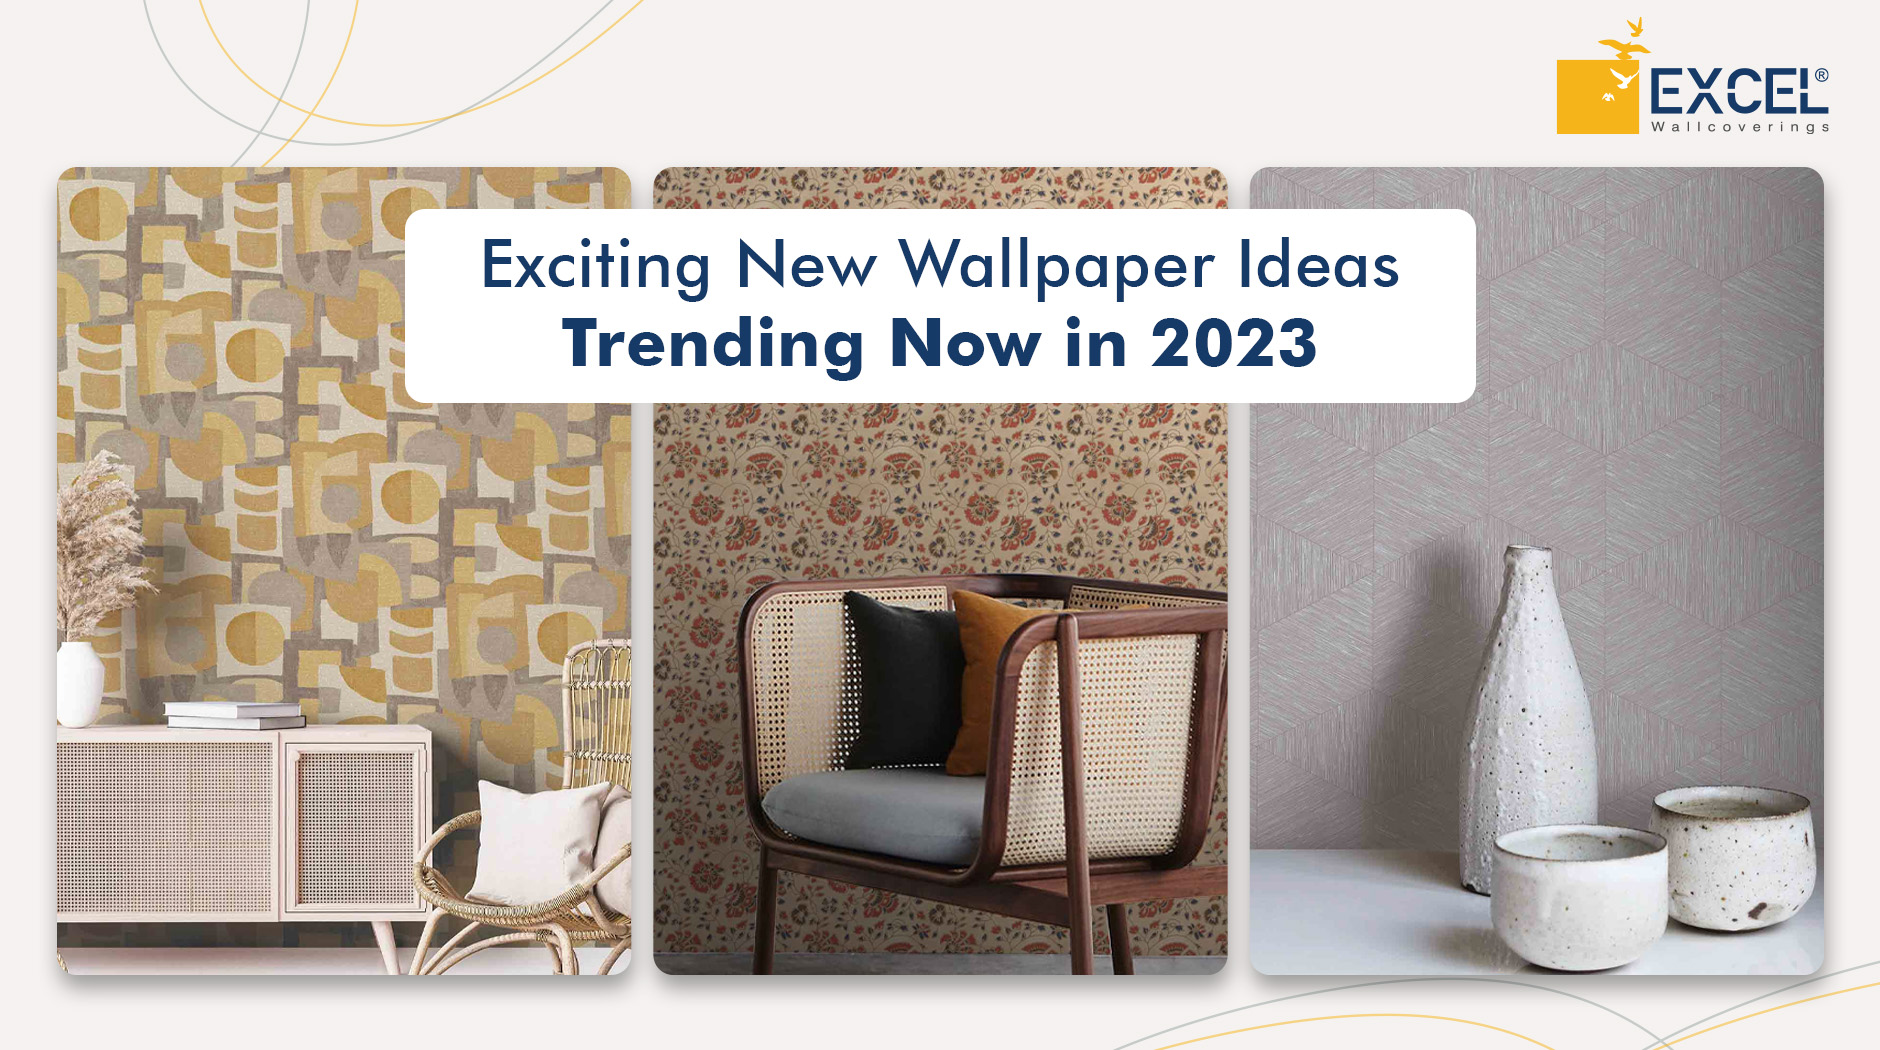 New Wallpaper Ideas Trending Now in 2023 for Home Walls